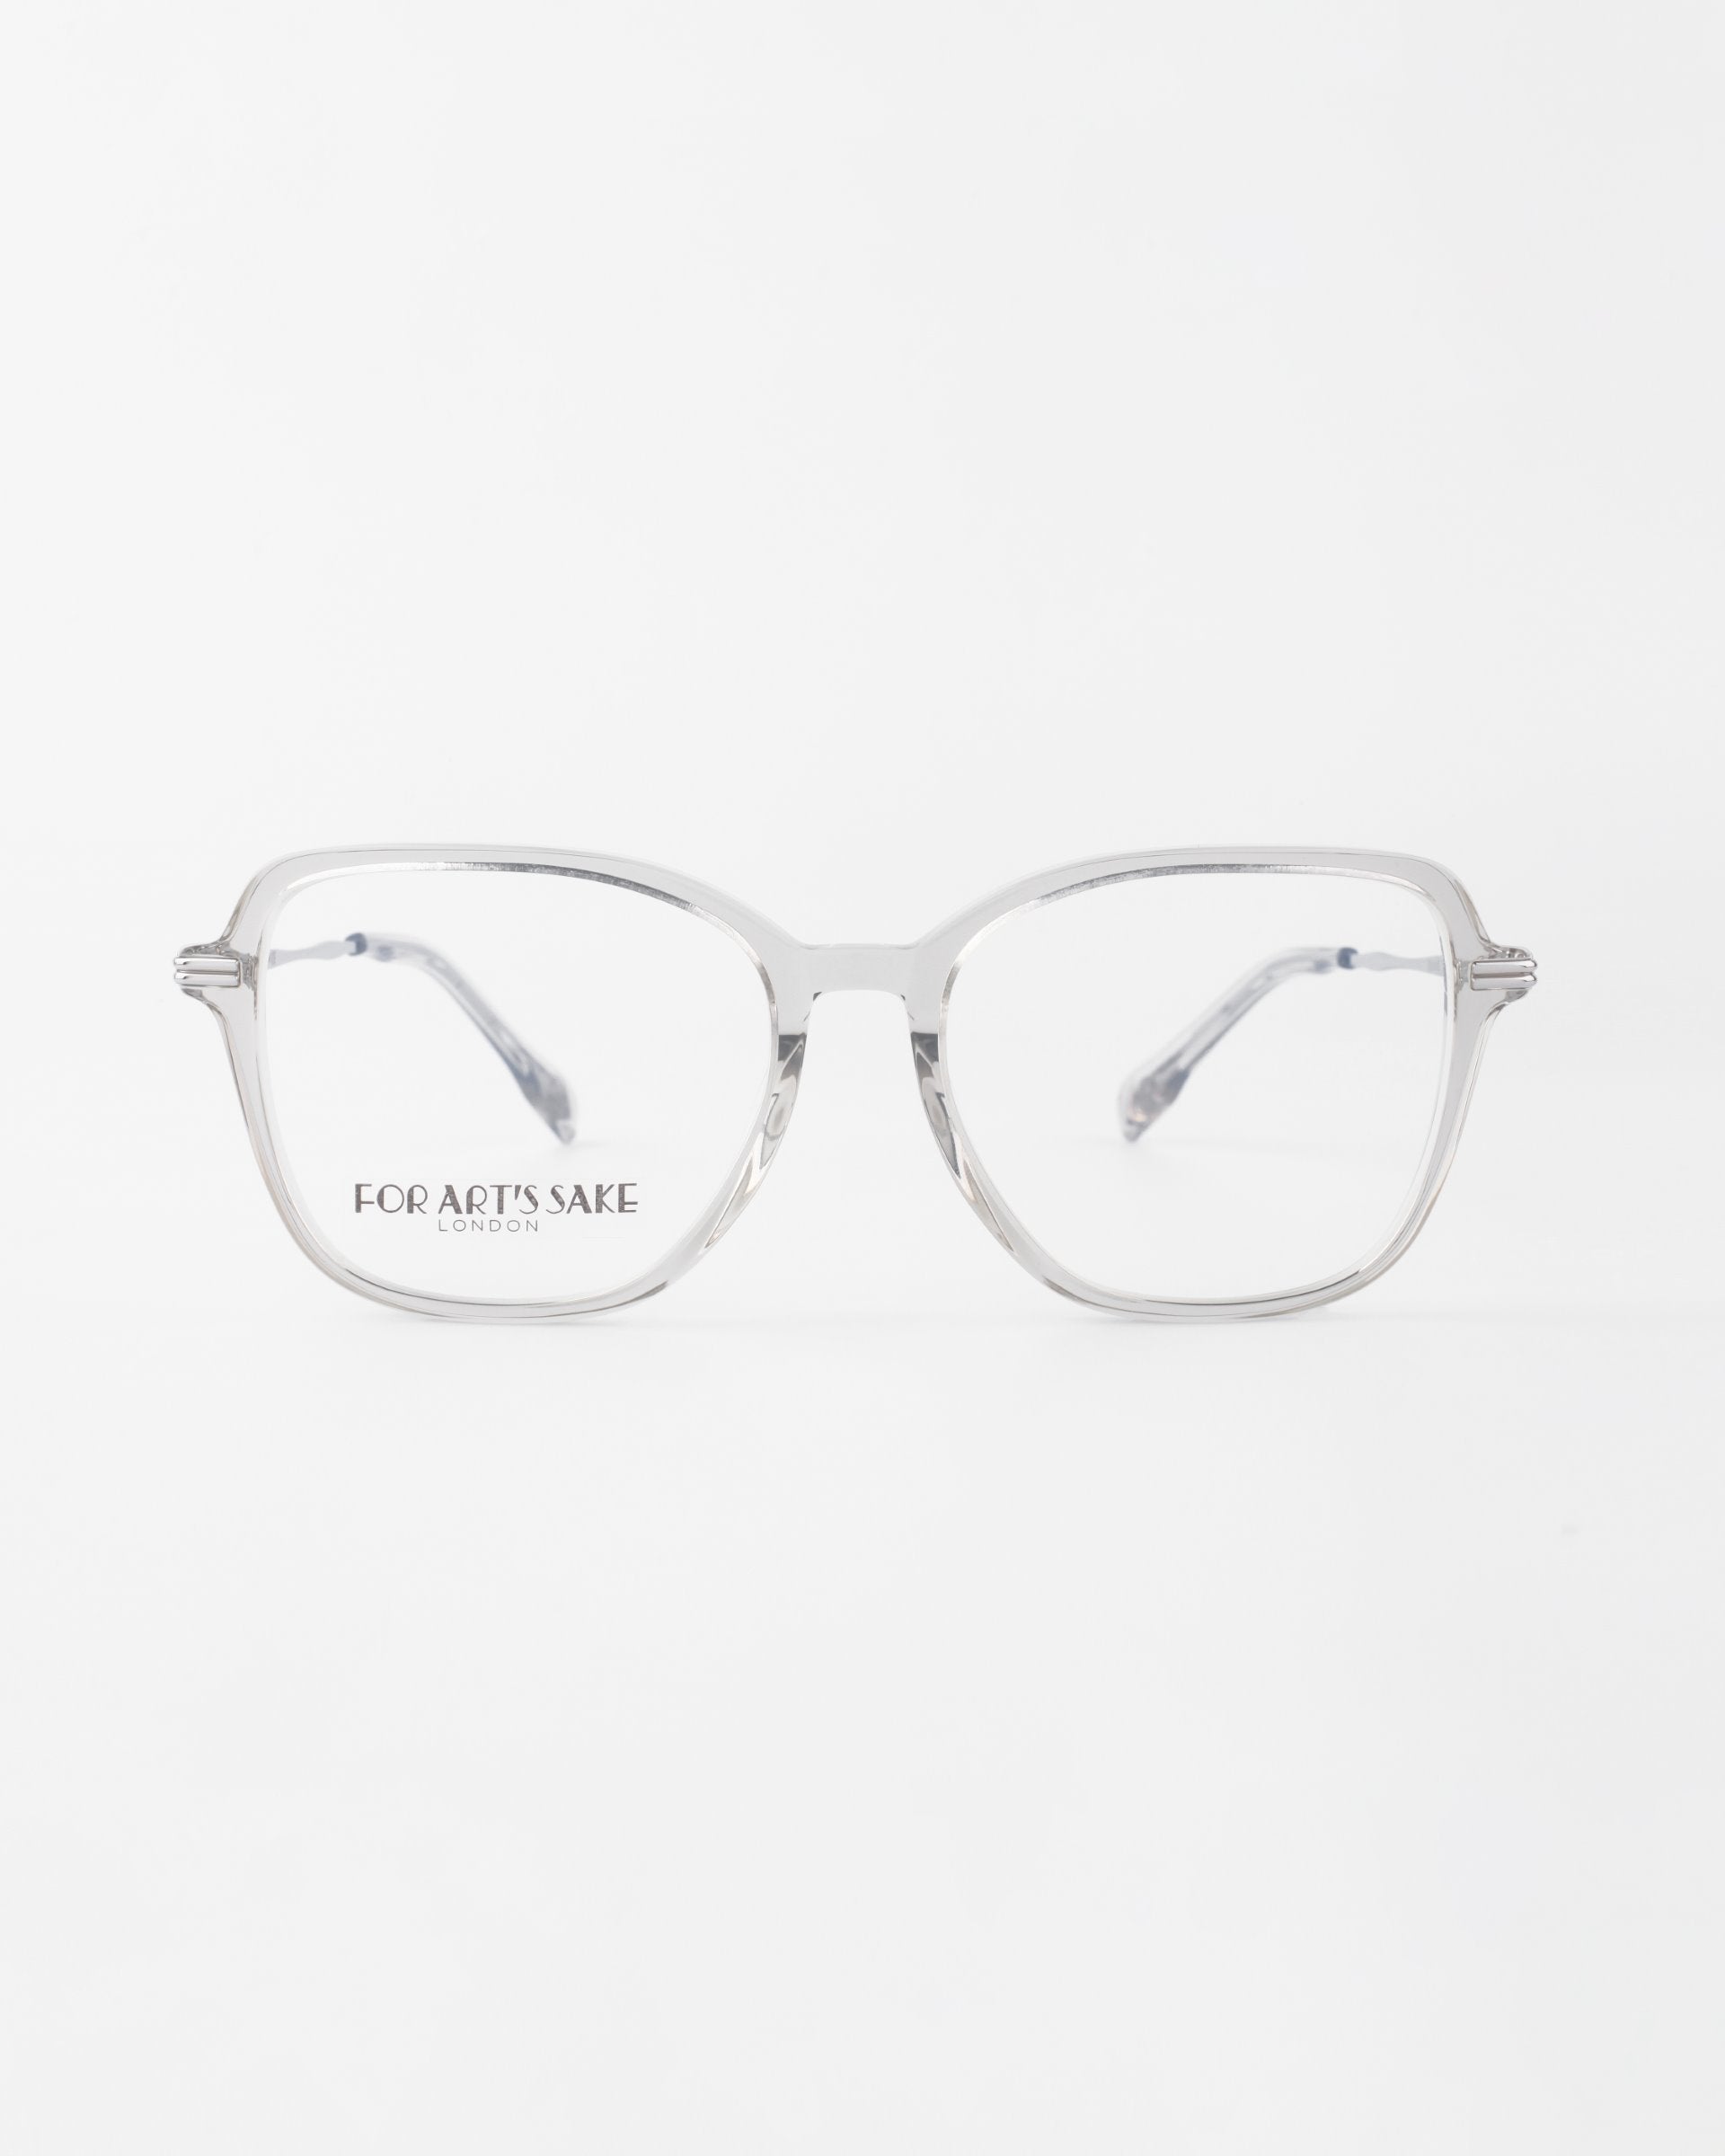 Clear, square-rimmed glasses with a silver metal frame and prescription lenses, inscribed with "For Art's Sake® London" on the left lens, placed against a plain white background.